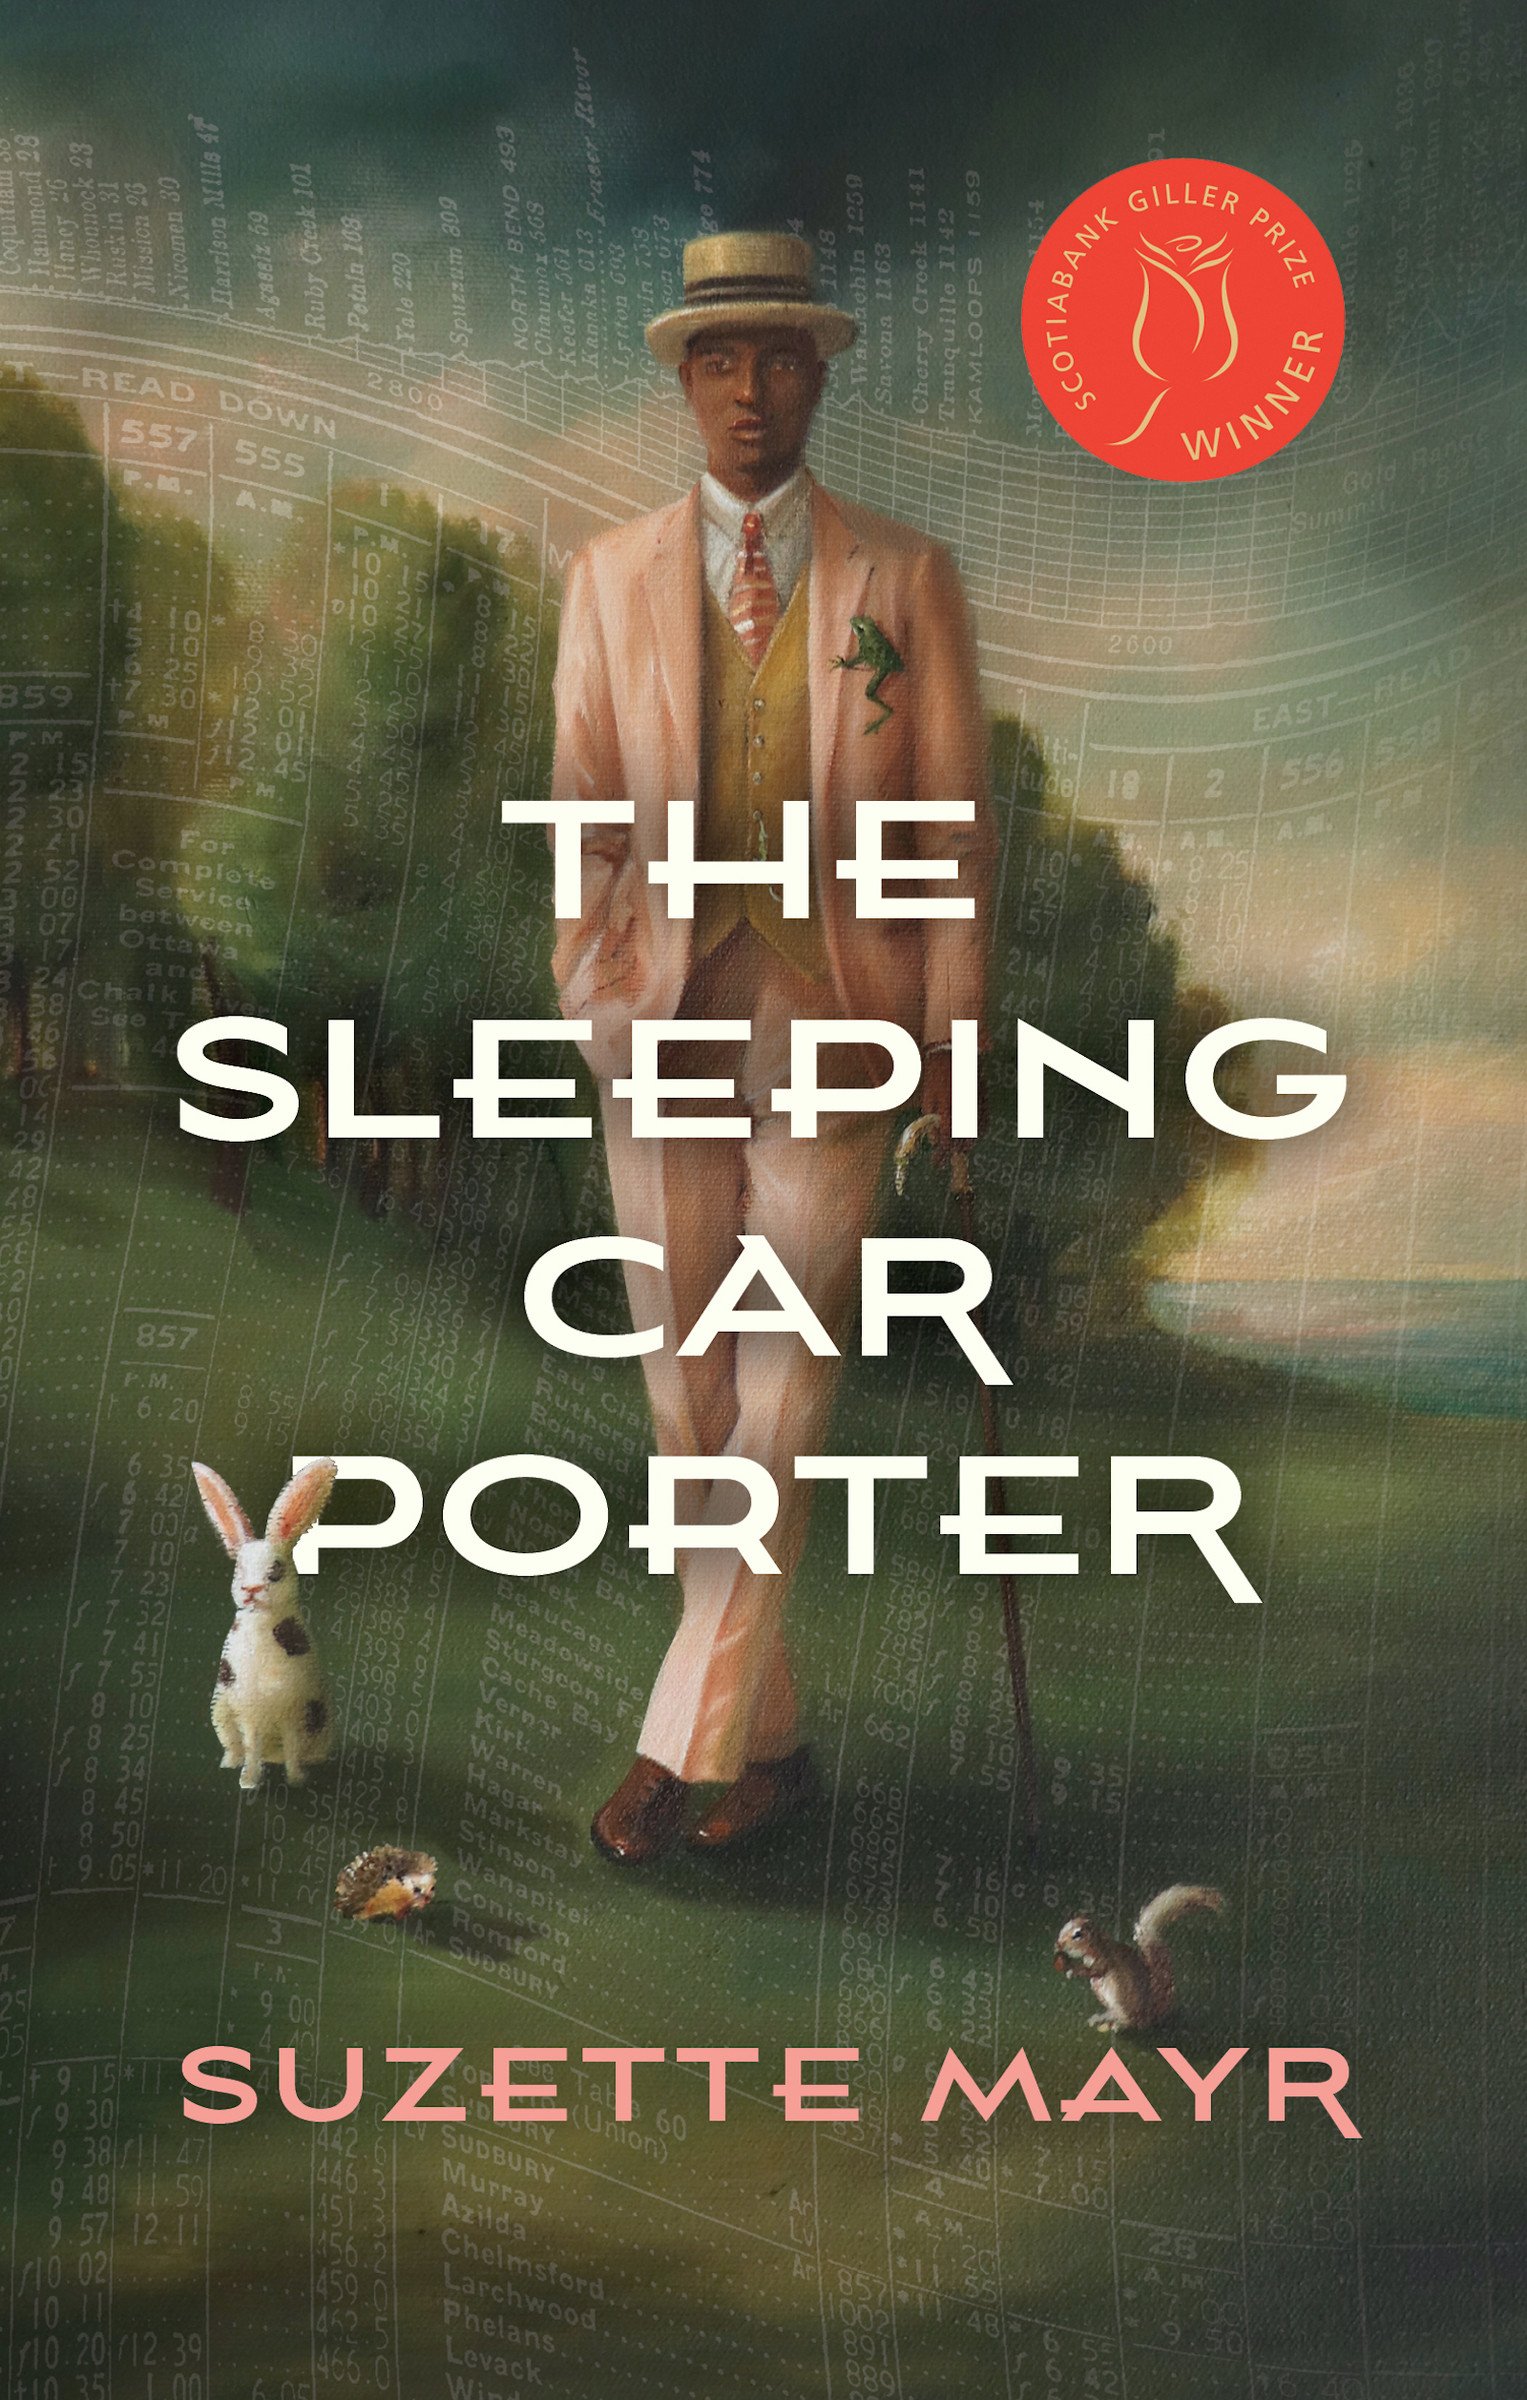 The cover of The Sleeping Car Porter by Suzette Mayr